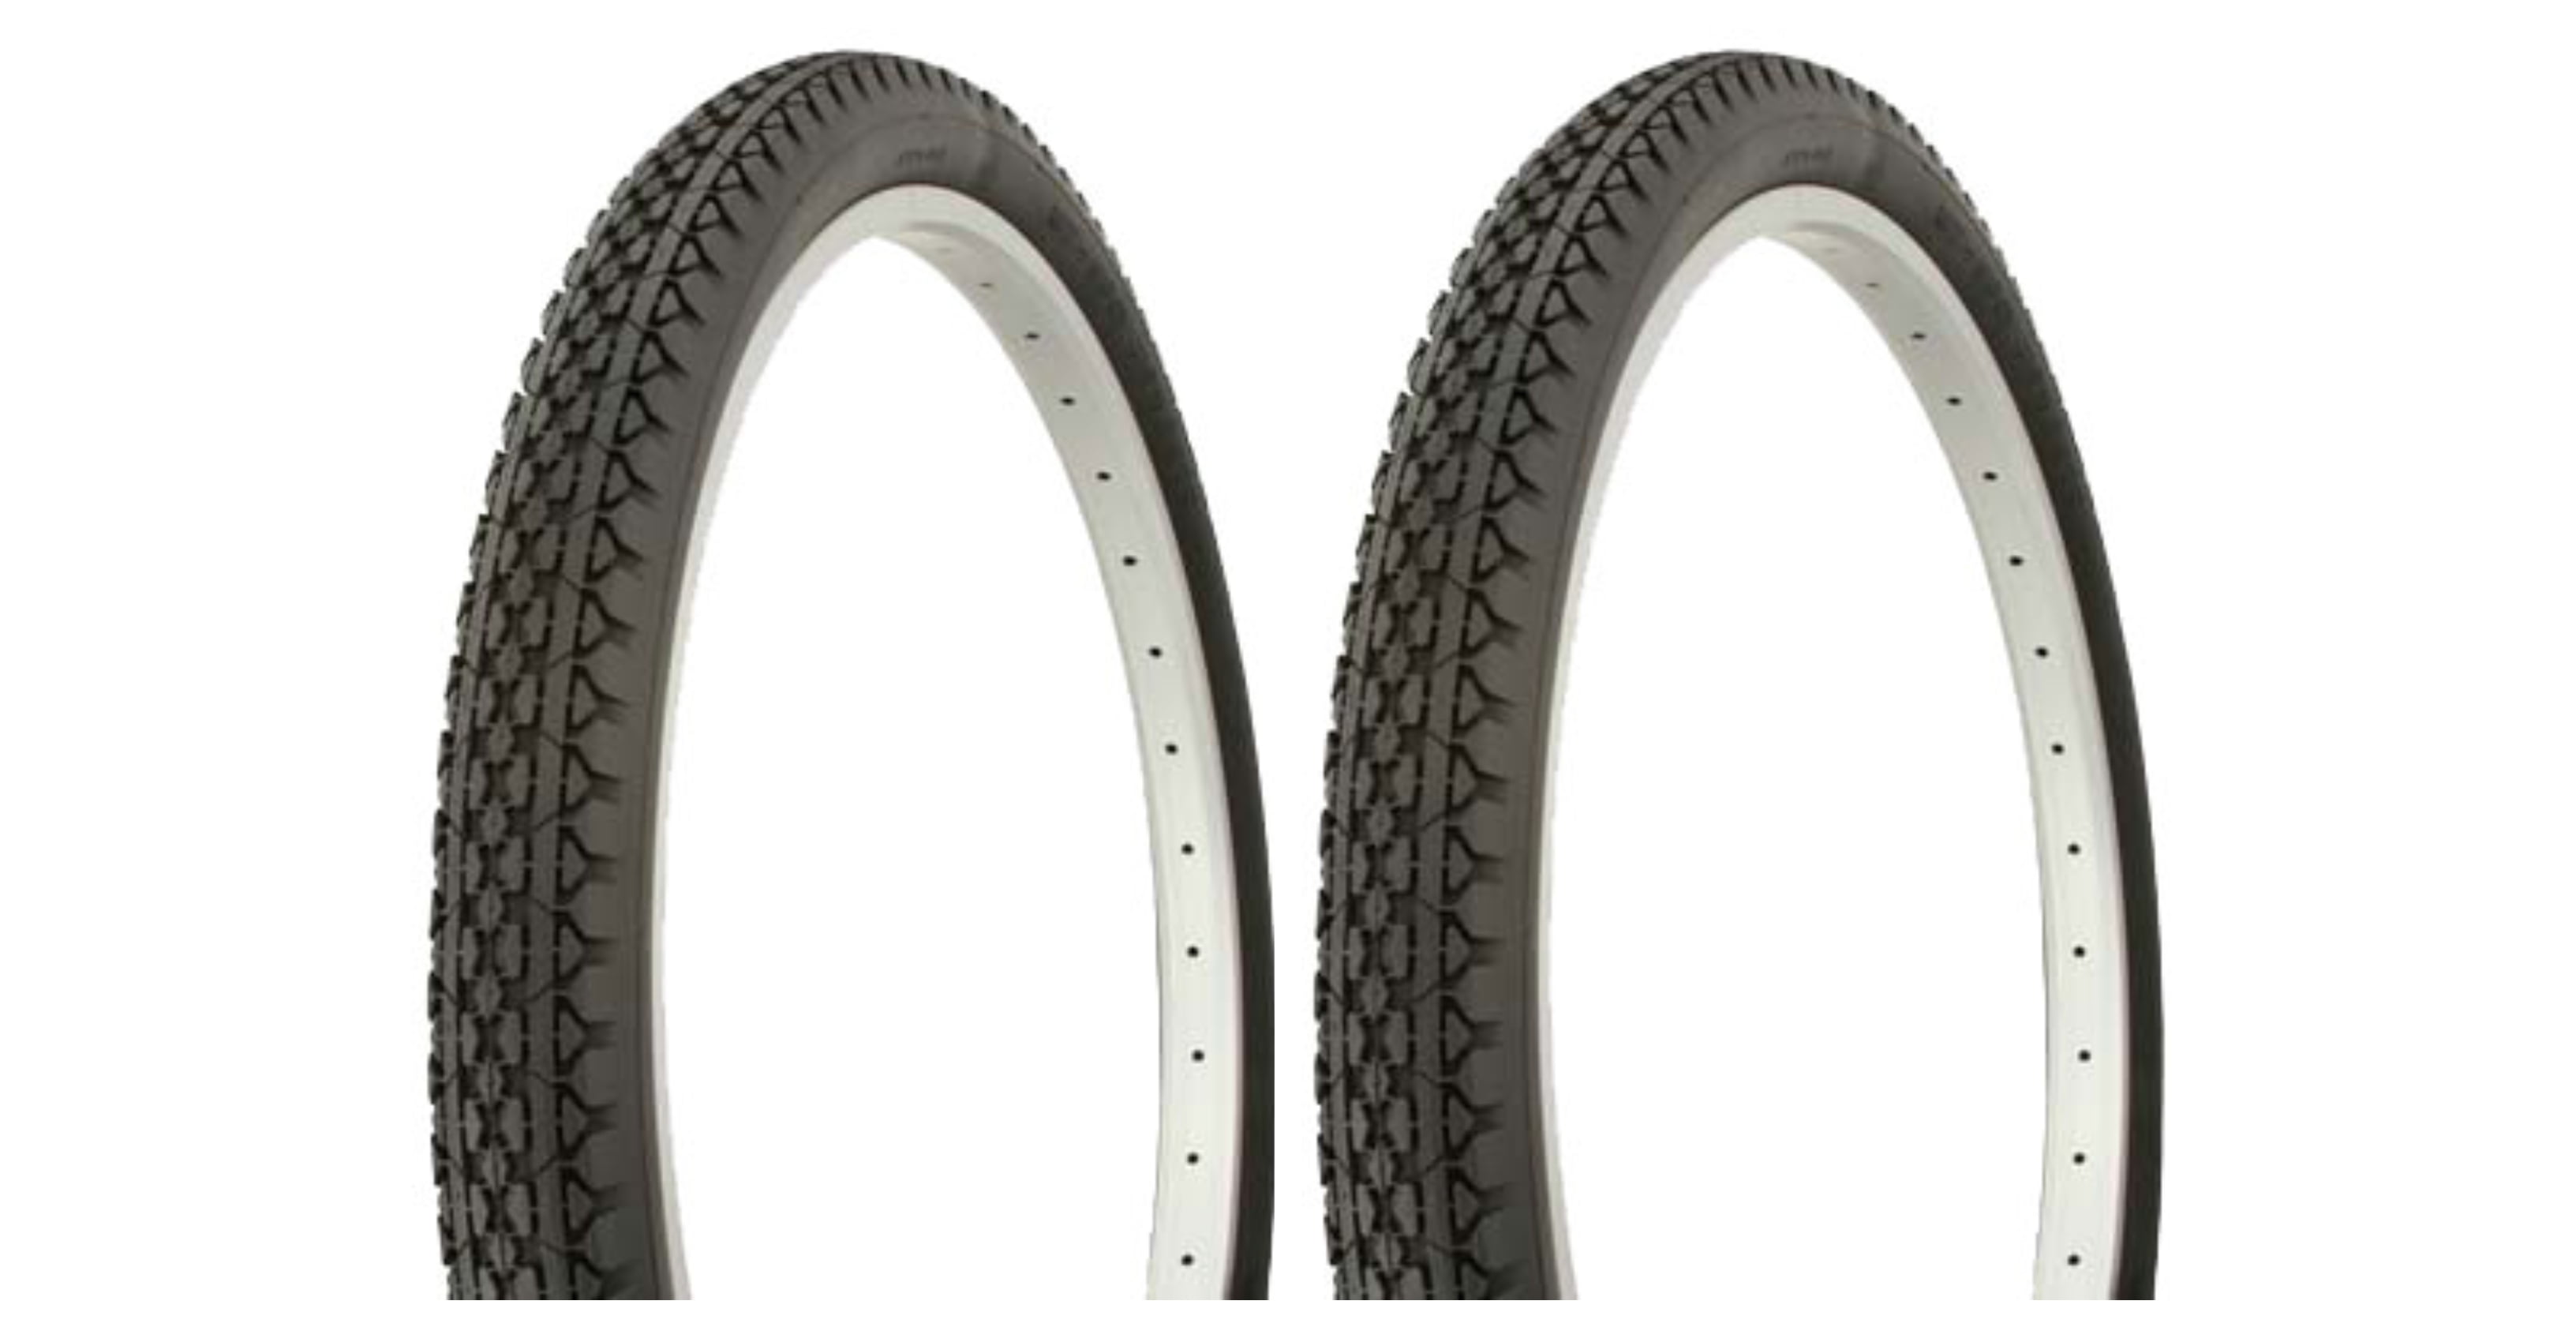 ORIGINAL BICYCLE DURO TIRE IN 26 X 1.75 BLACK/BLACK SIDE WALL IN HF-822. NEW 